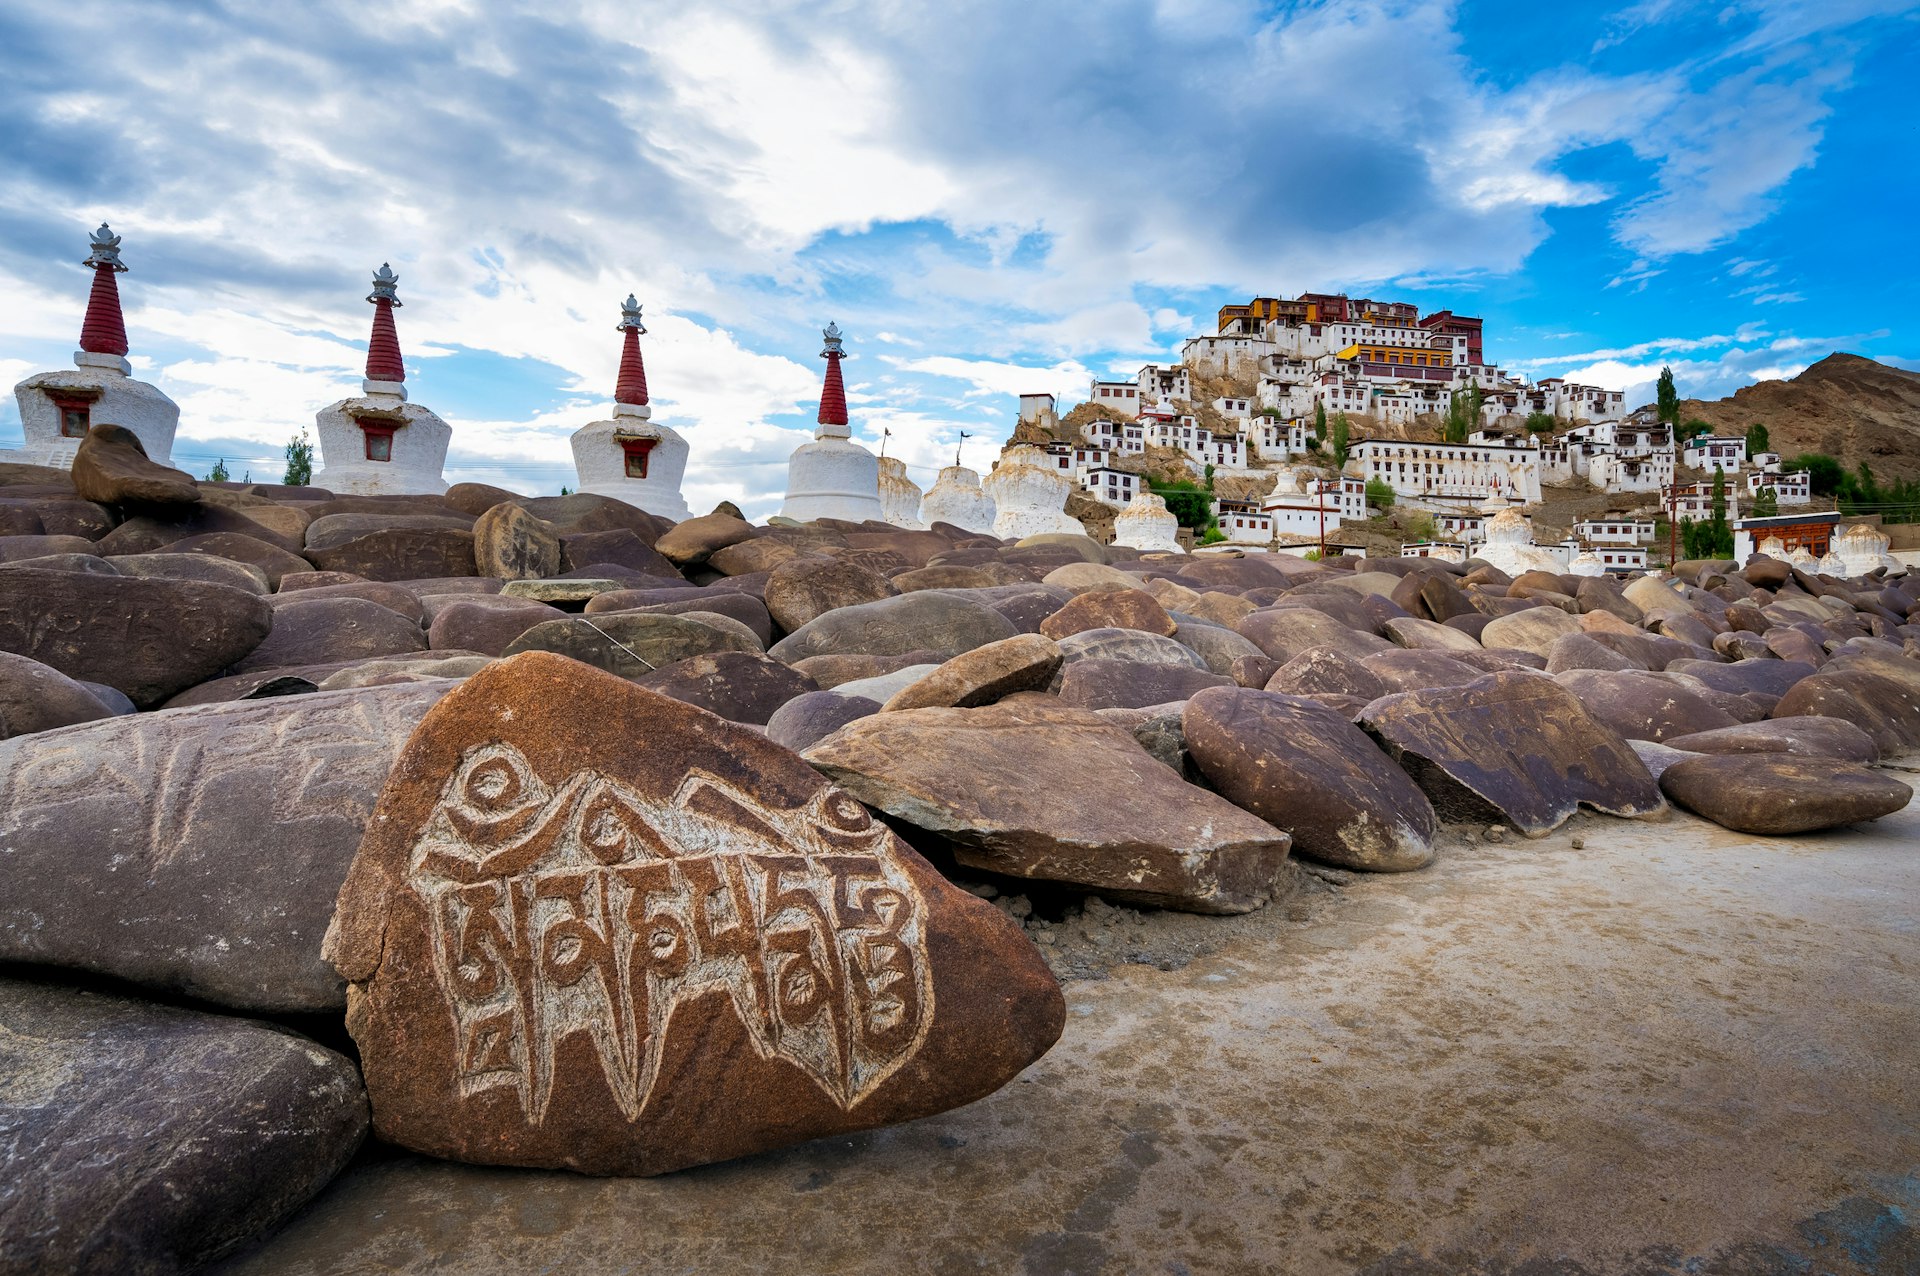 View of Thikse Monastery and prayer rocks in Ladakh India